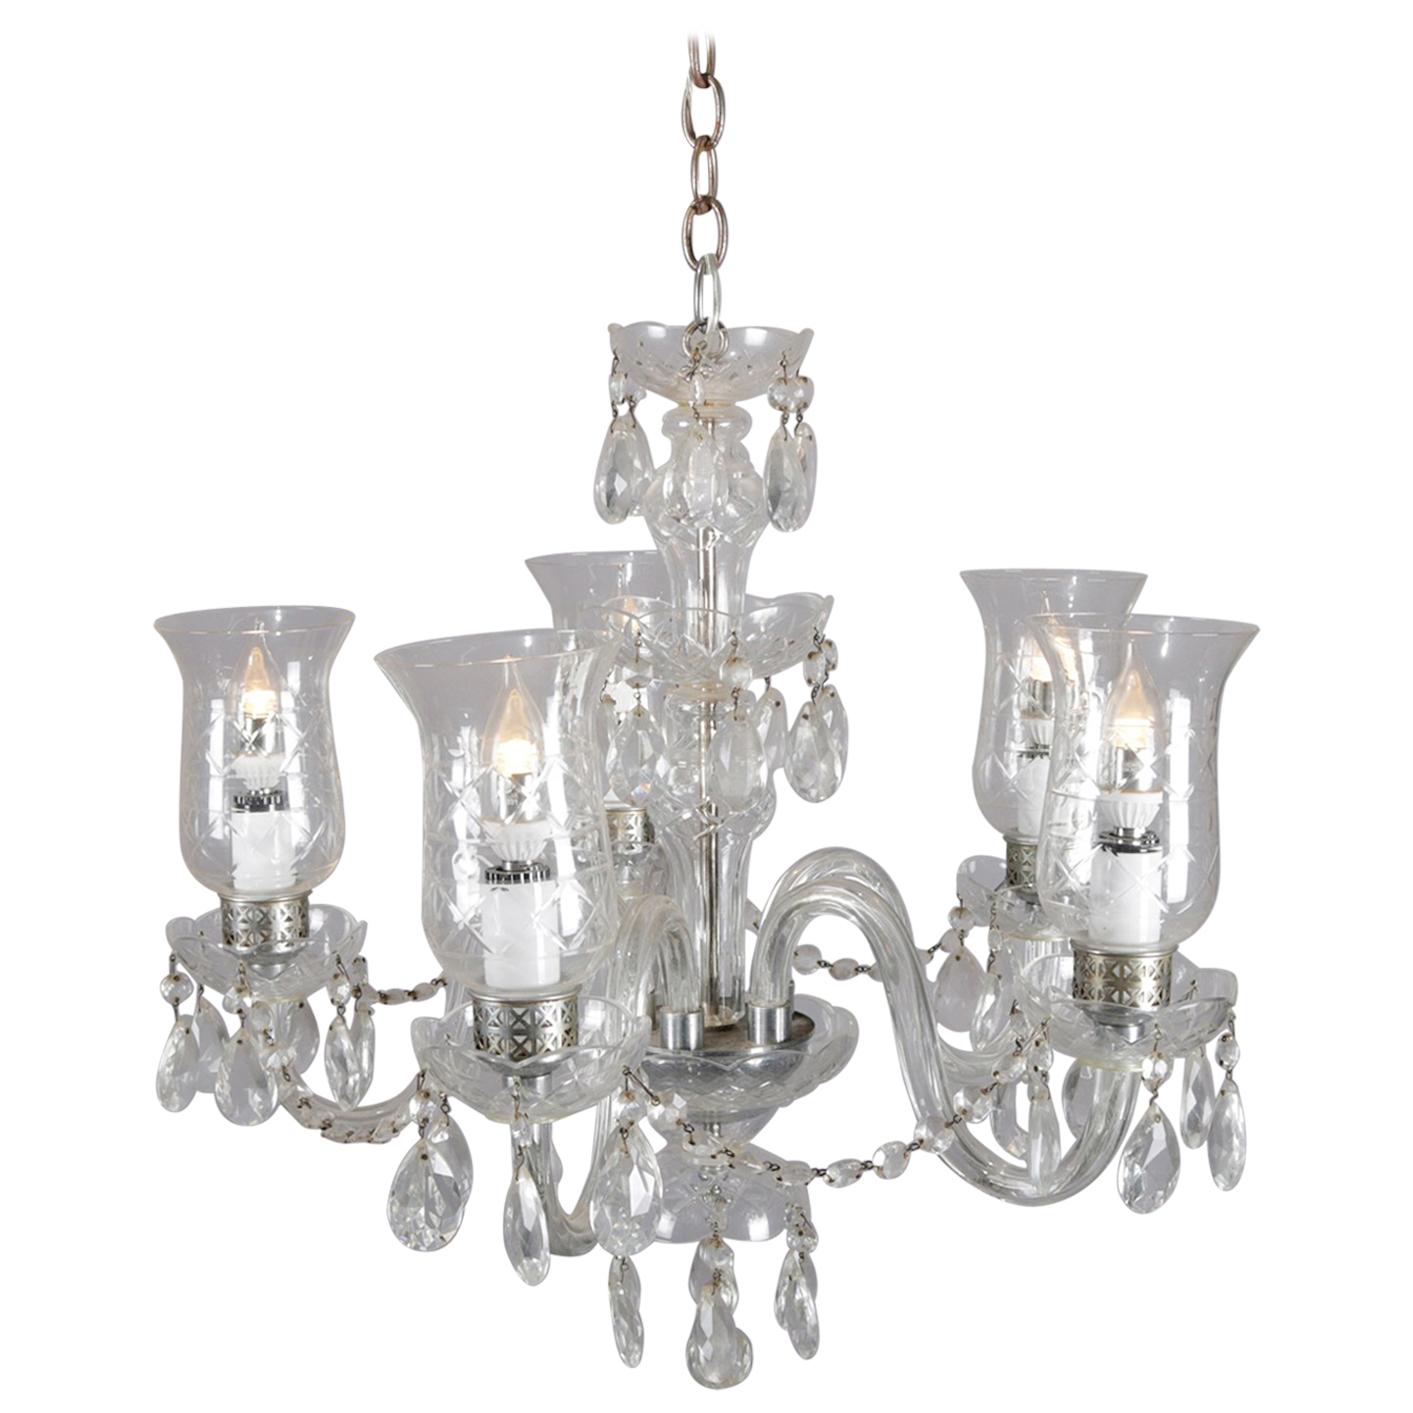 Vintage French Crystal and Chrome 5-Light Chandelier with Cut Glass Shades